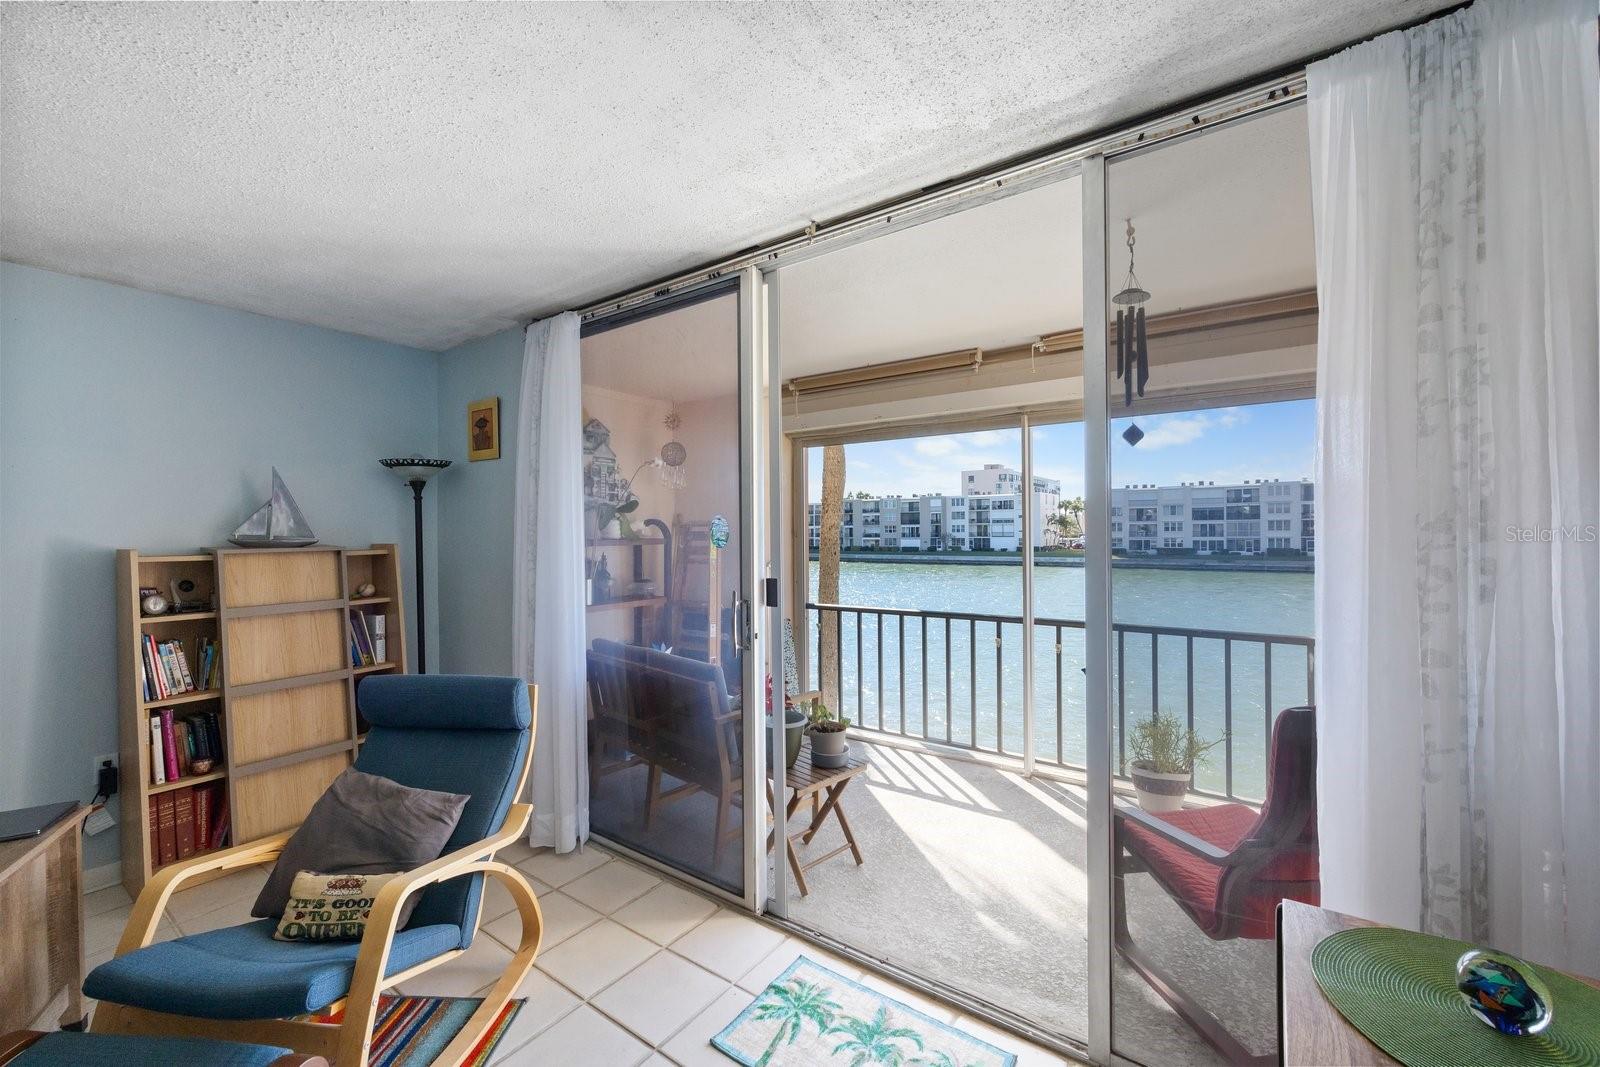 Watch the Doplins, Manatees and Sunsets from the privacy of your balcony